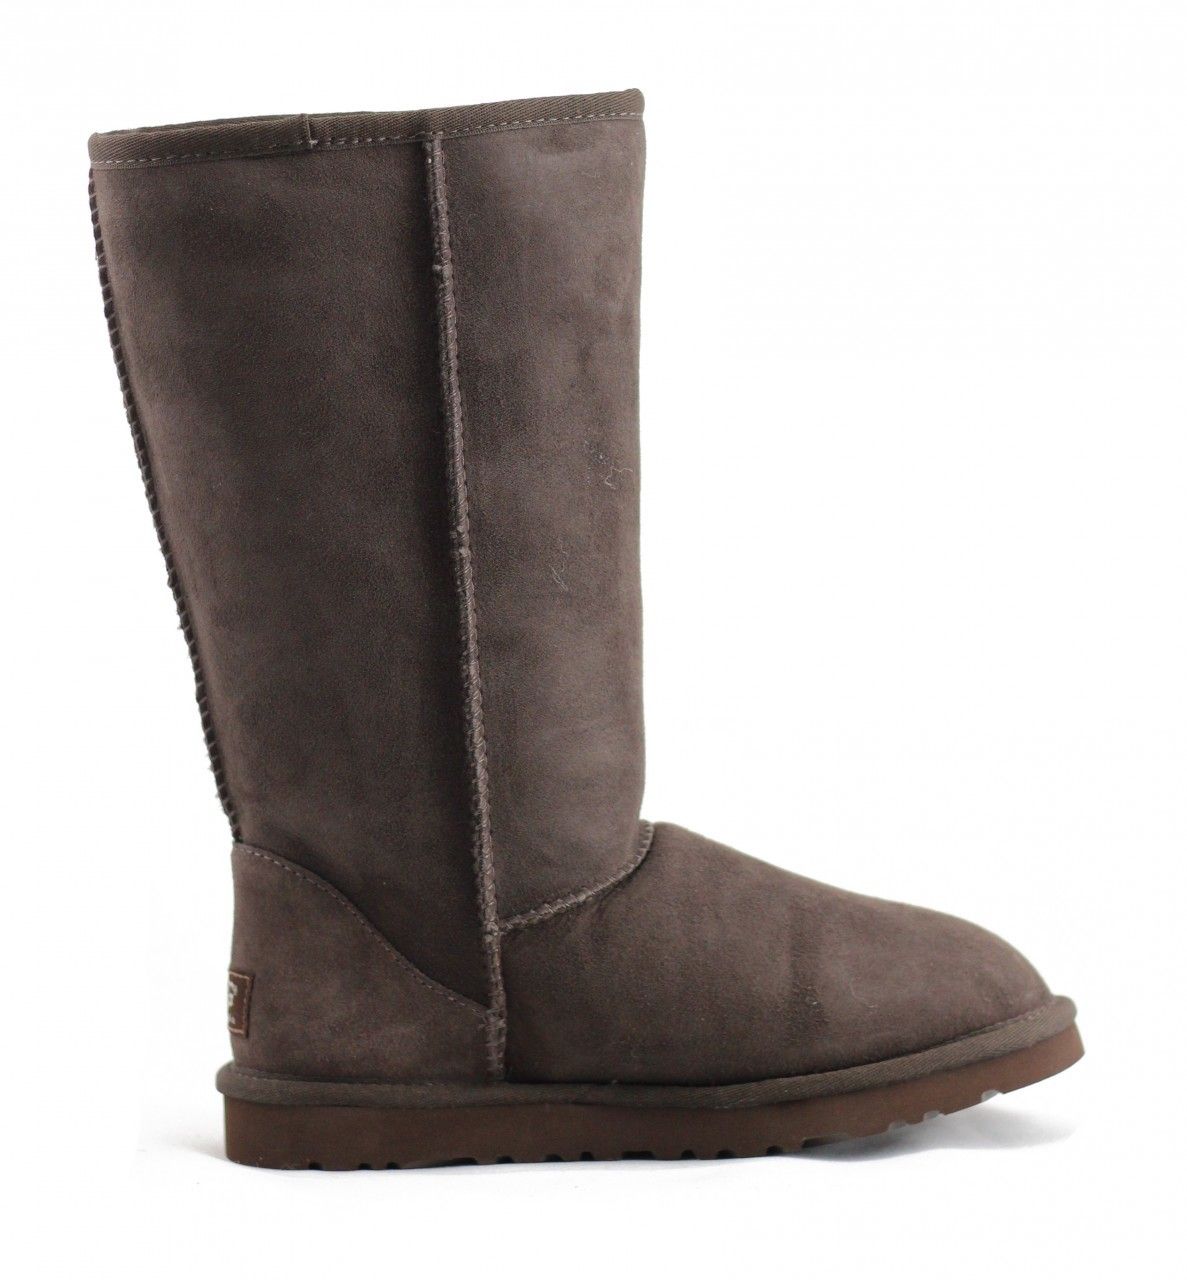 brown tall ugg boots